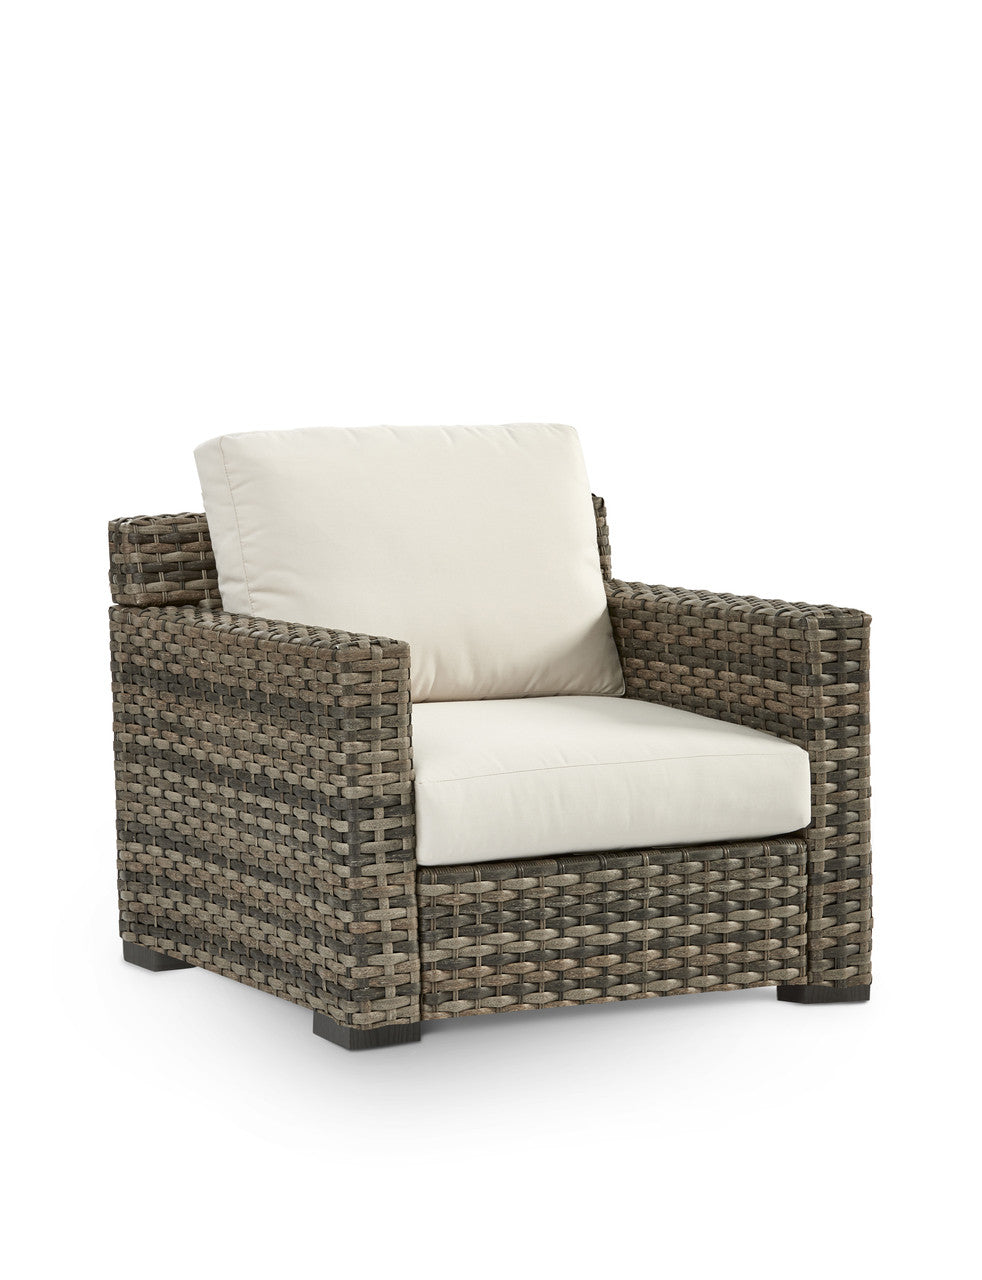 South Sea Rattan New Java Resin Wicker Outdoor Club Chair